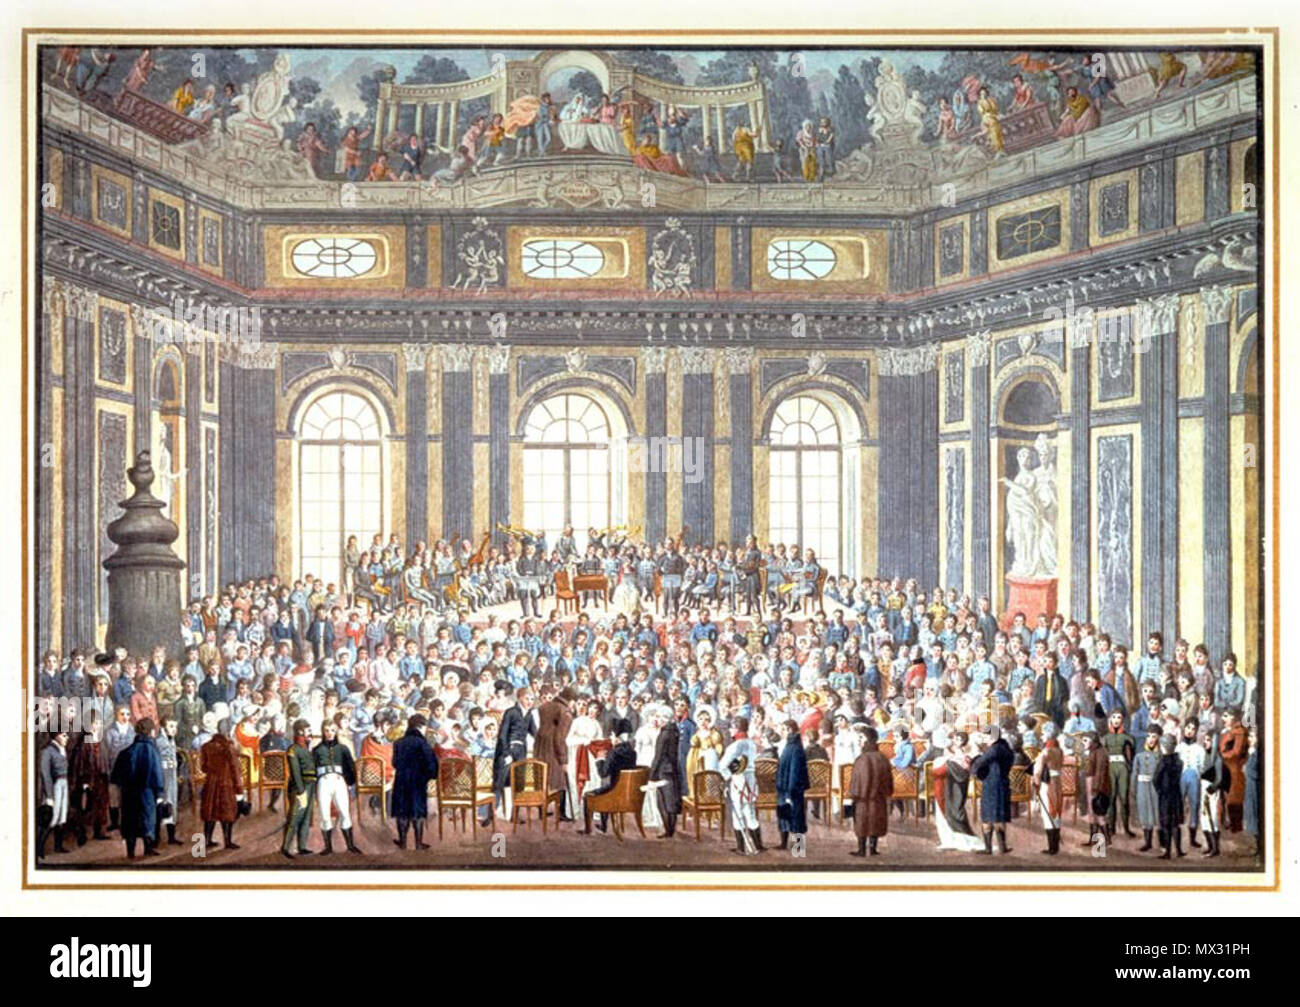 . English: Color print, from 1909, of a watercolor on the lid of a stationery box made by Balthazar Wigand and presented to the composer Joseph Haydn. It commemorates Haydn's attendance, in extreme old age, of a performance of his oratorio The Creation. (The composer can be seen seated in the lower center of the image, wearing wig and hat.) The original of this picture was lost in 1945. 1808. Balthasar Wigand 6 1808PerformanceOfHaydnCreation Stock Photo